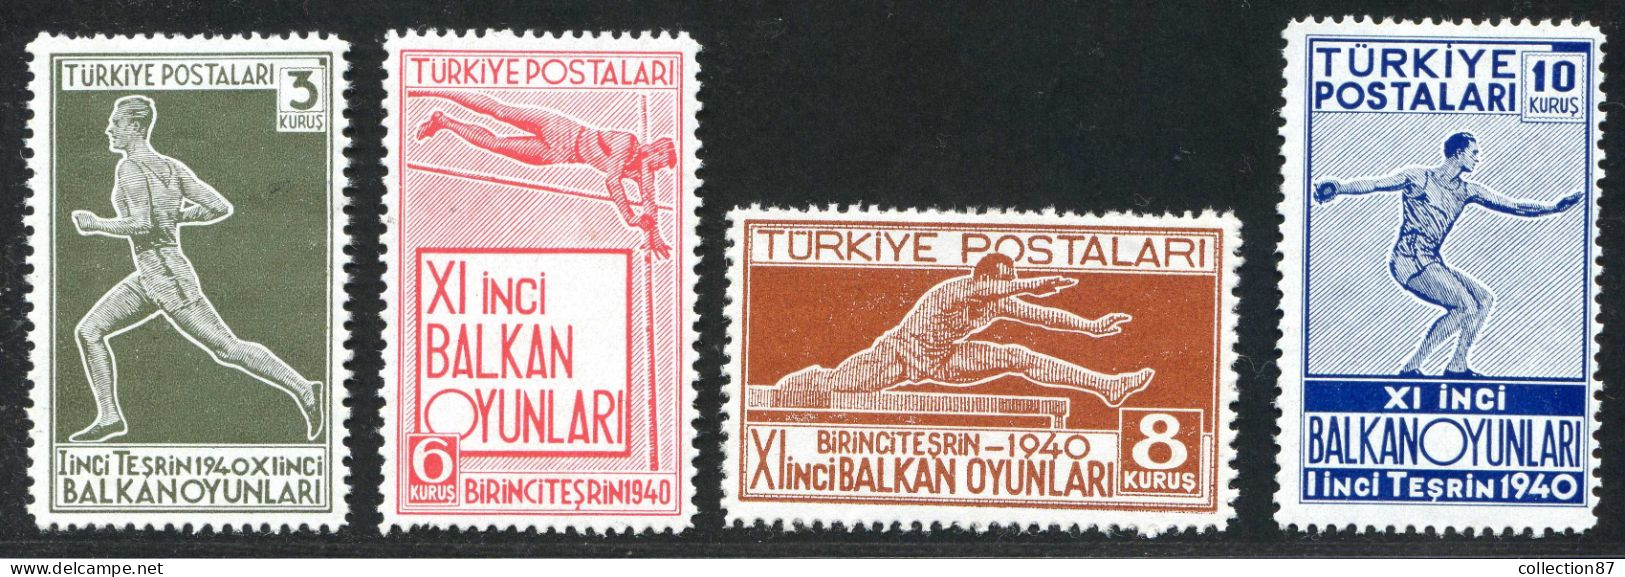 REF 091 > TURQUIE < Yv N° 943 à 946 * * < Neuf Luxe Dos Visible MNH * * Cat 33 € - Turkey Sport Athlétisme - Nuovi